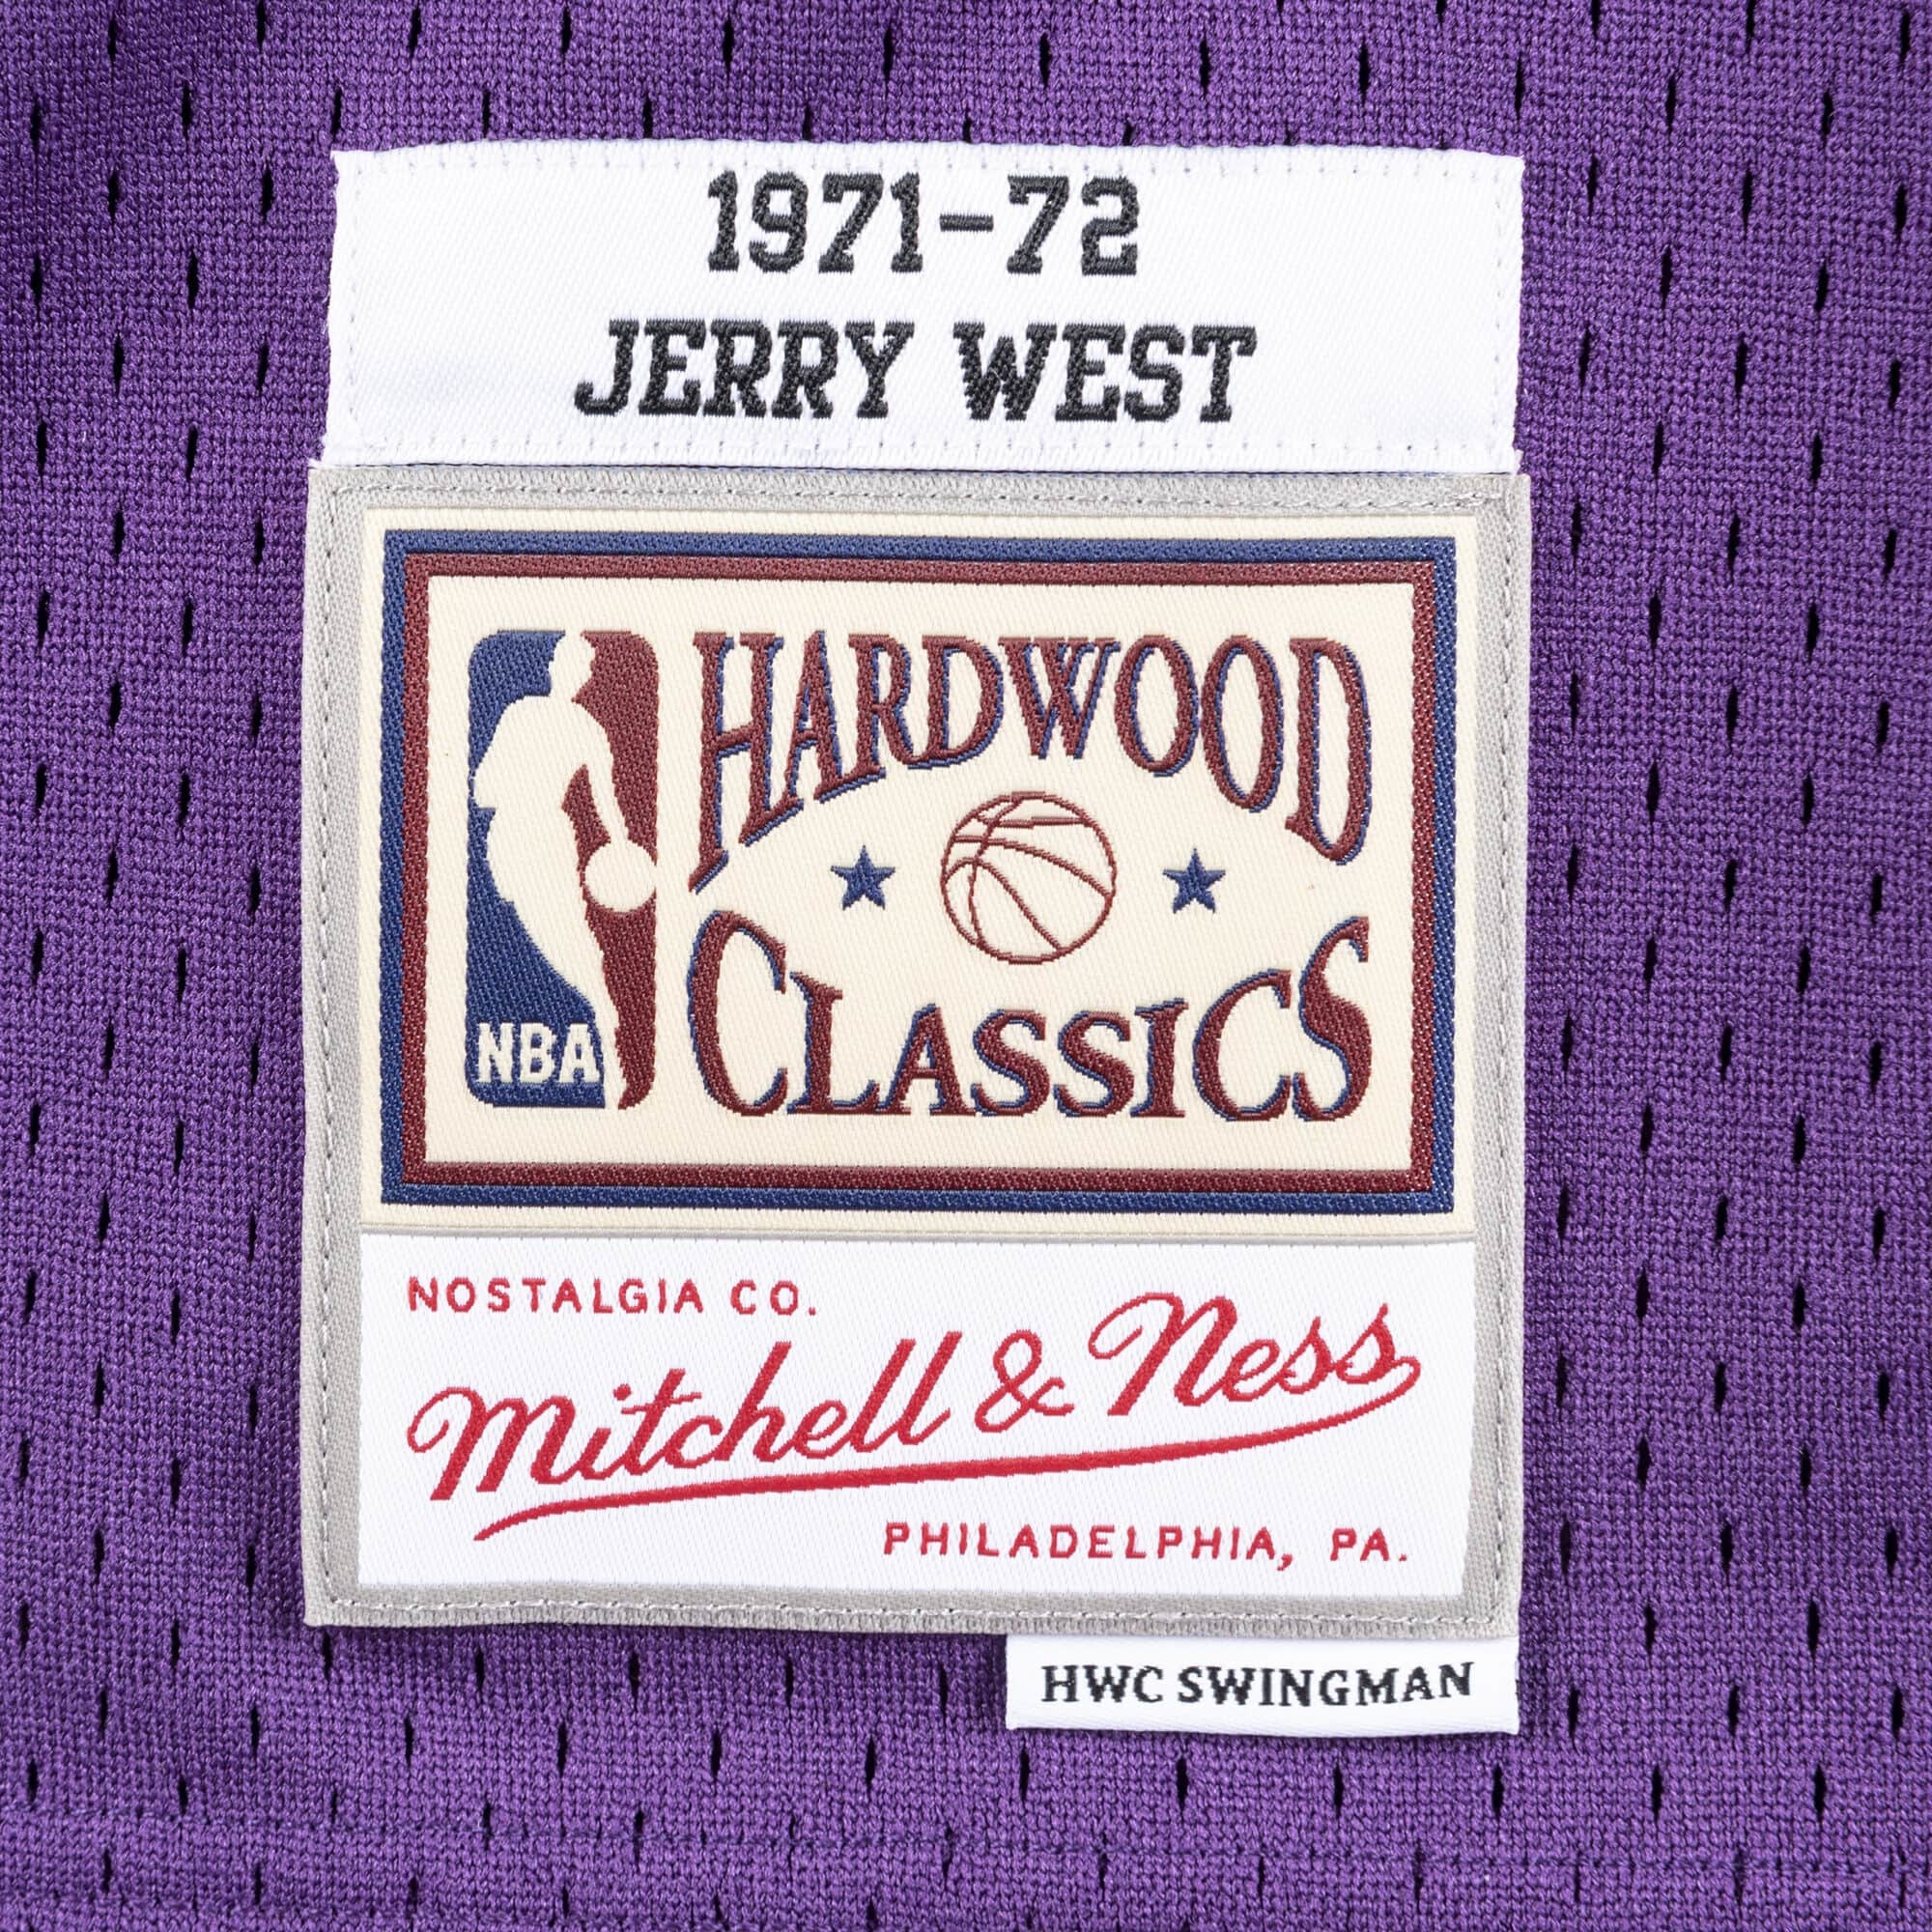 Tristar Jerry West Autographed Los Angeles Lakers Purple M&N Swingman Jersey Inscribed The Logo